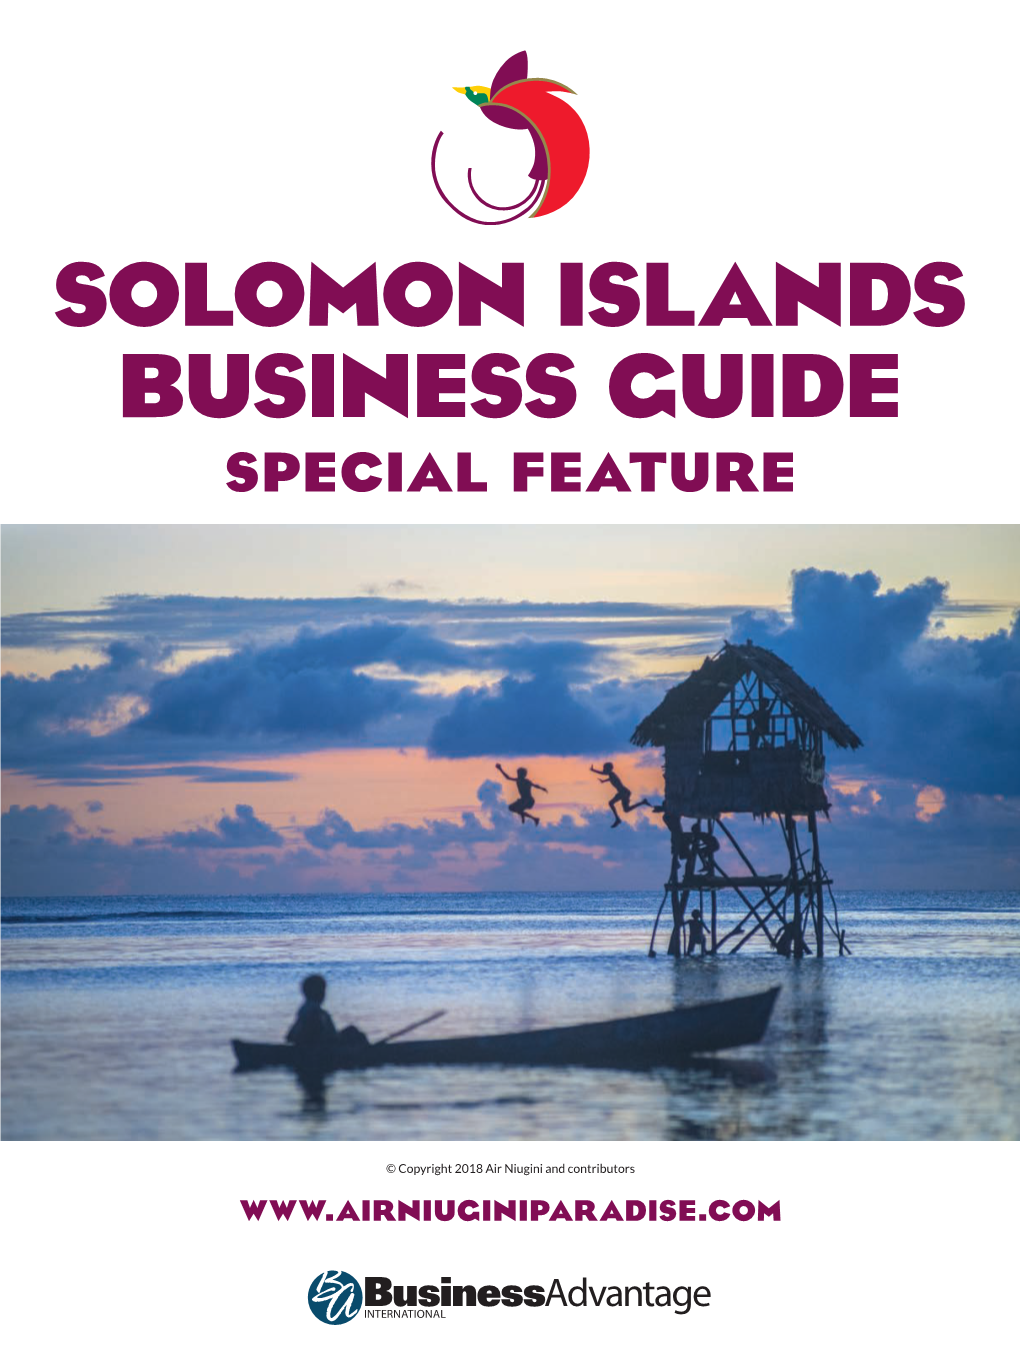 Solomon Islands Business Guide S Pecial Feature This Feature First Published in the July/Aug 2017 Edition of Paradise Magazine